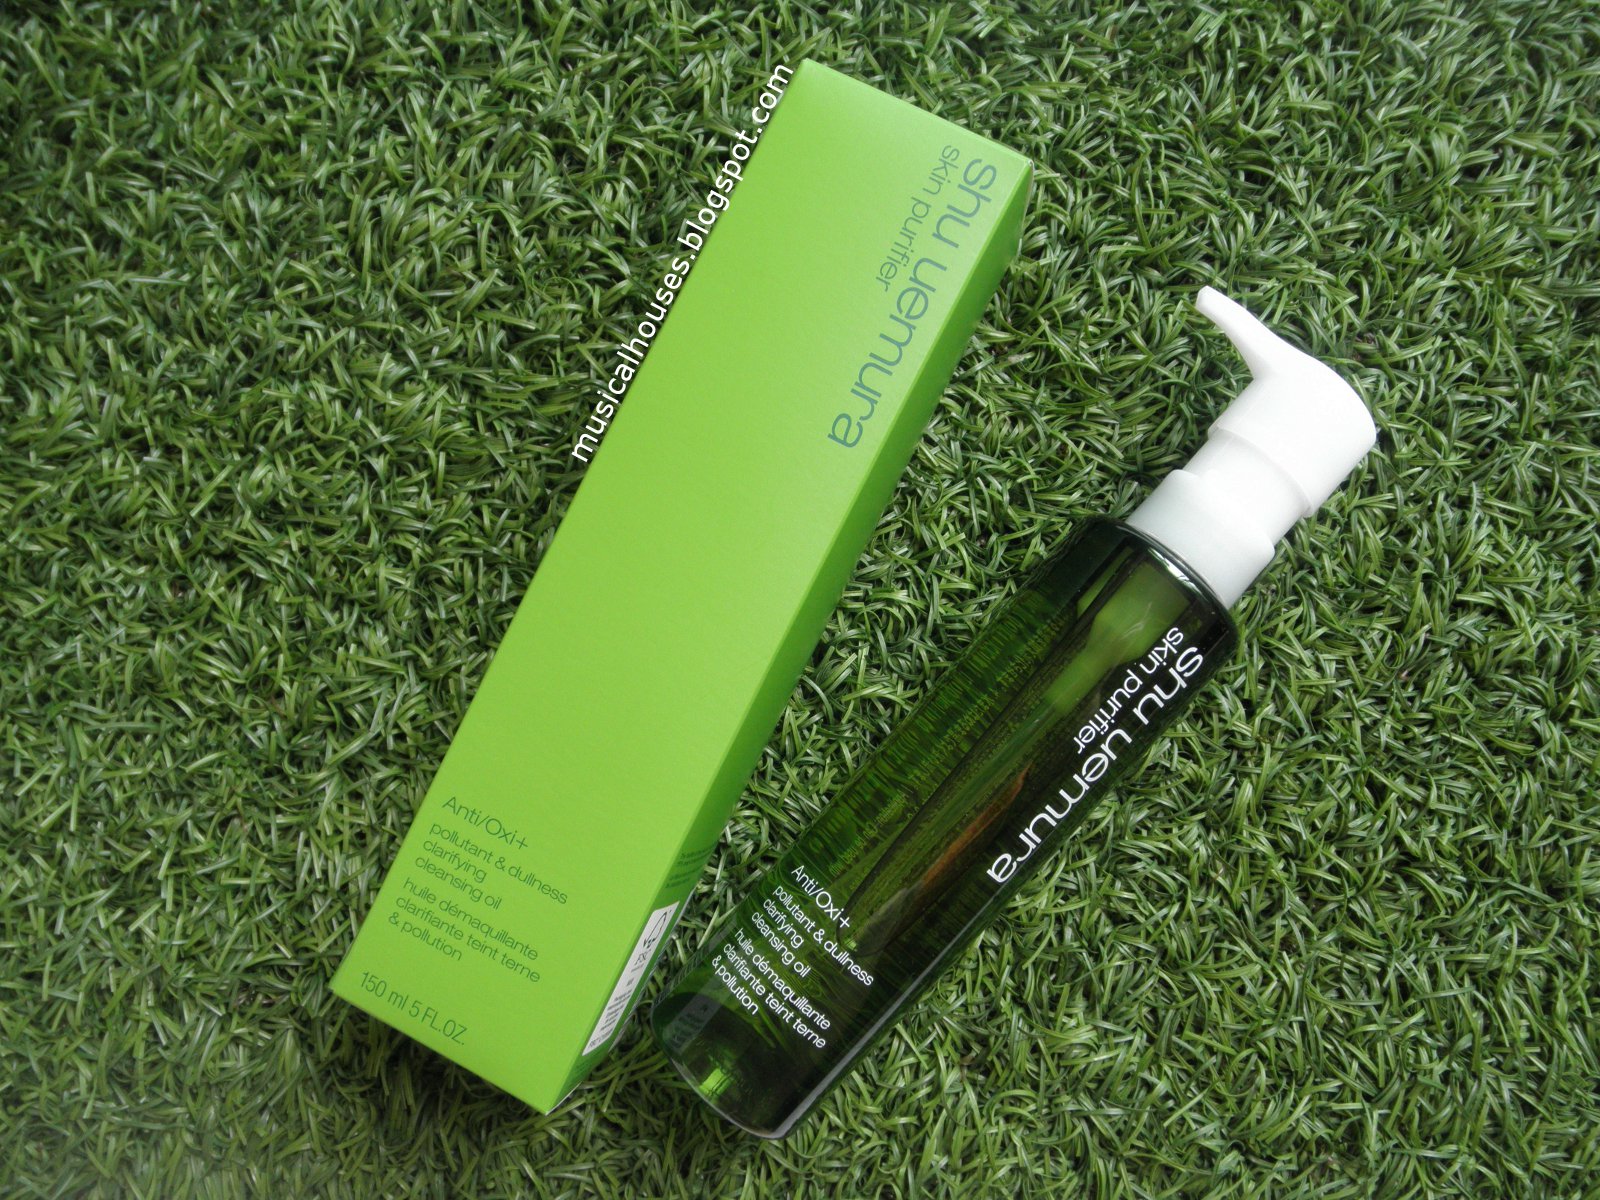 tyran syreindhold Cape Shu Uemura Anti/Oxi+ Cleansing Oil Review and Ingredients Analysis - of  Faces and Fingers